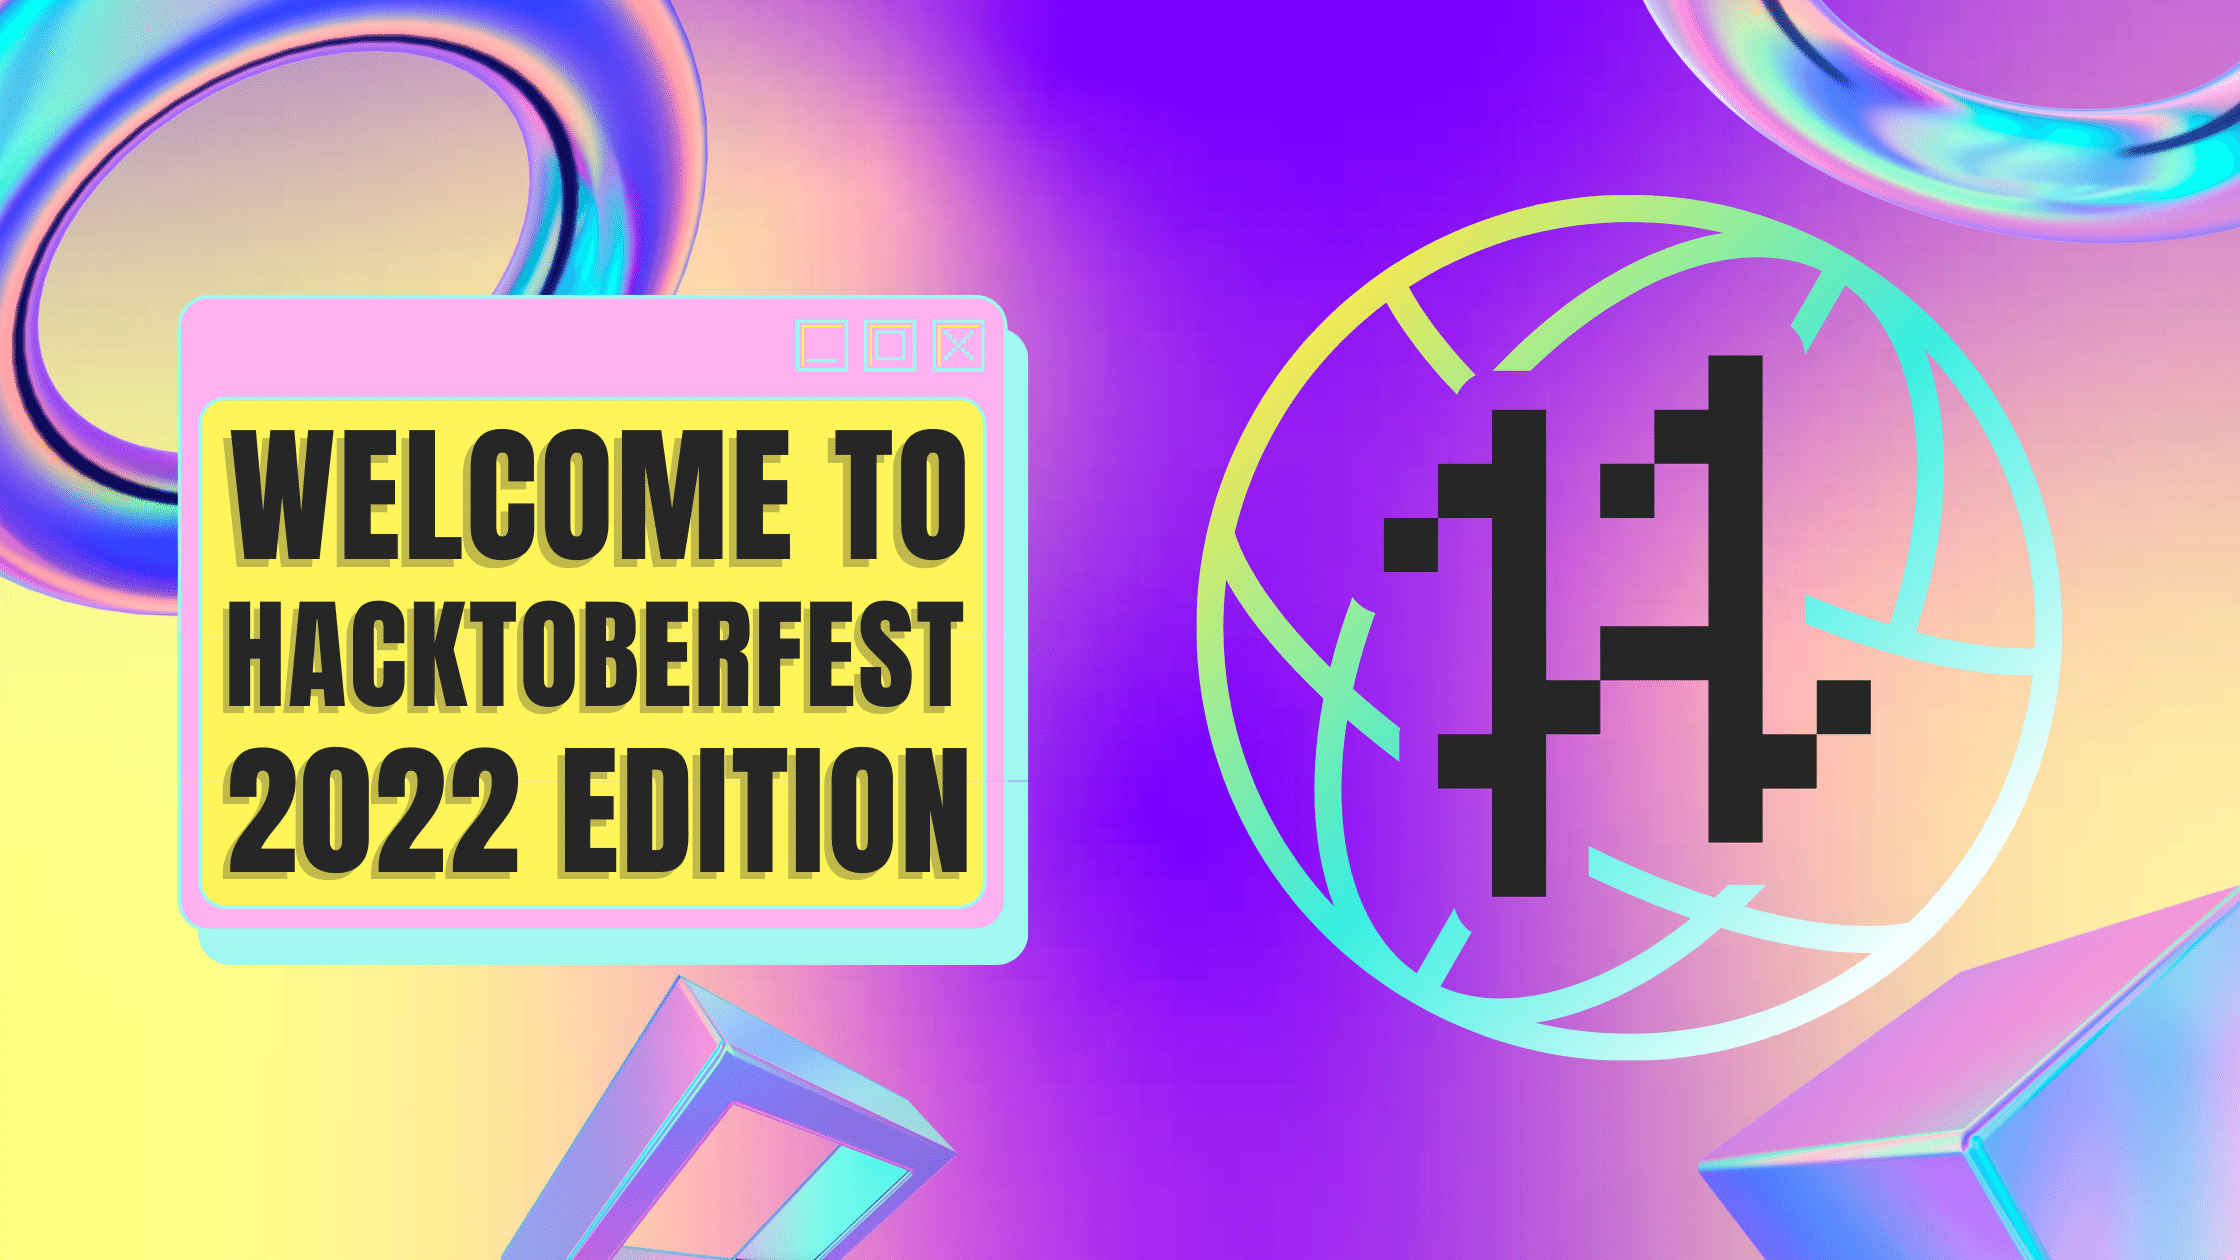 Hacking the Way to Hacktoberfest 2022